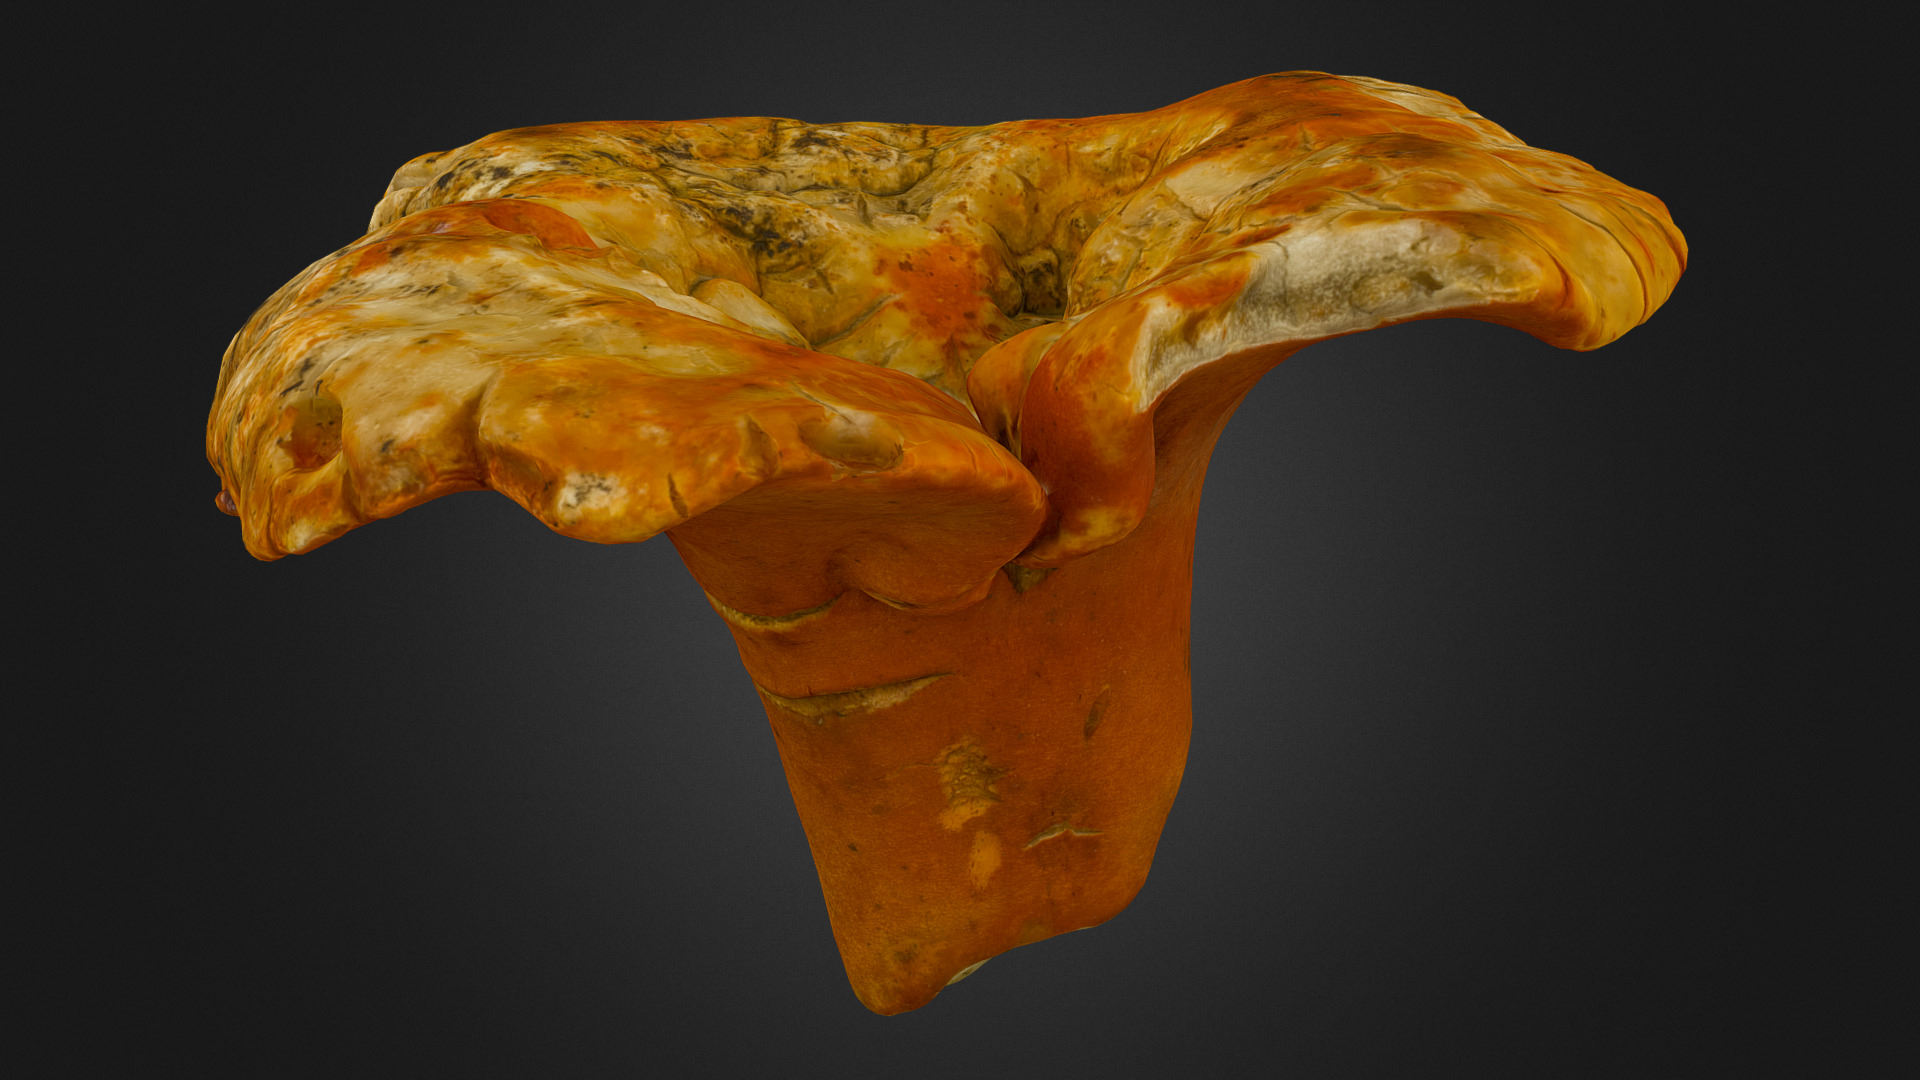 3D model Hypomyces lactifluorum mushroom - This is a 3D model of the Hypomyces lactifluorum mushroom. The 3D model is about a close-up of a human brain.